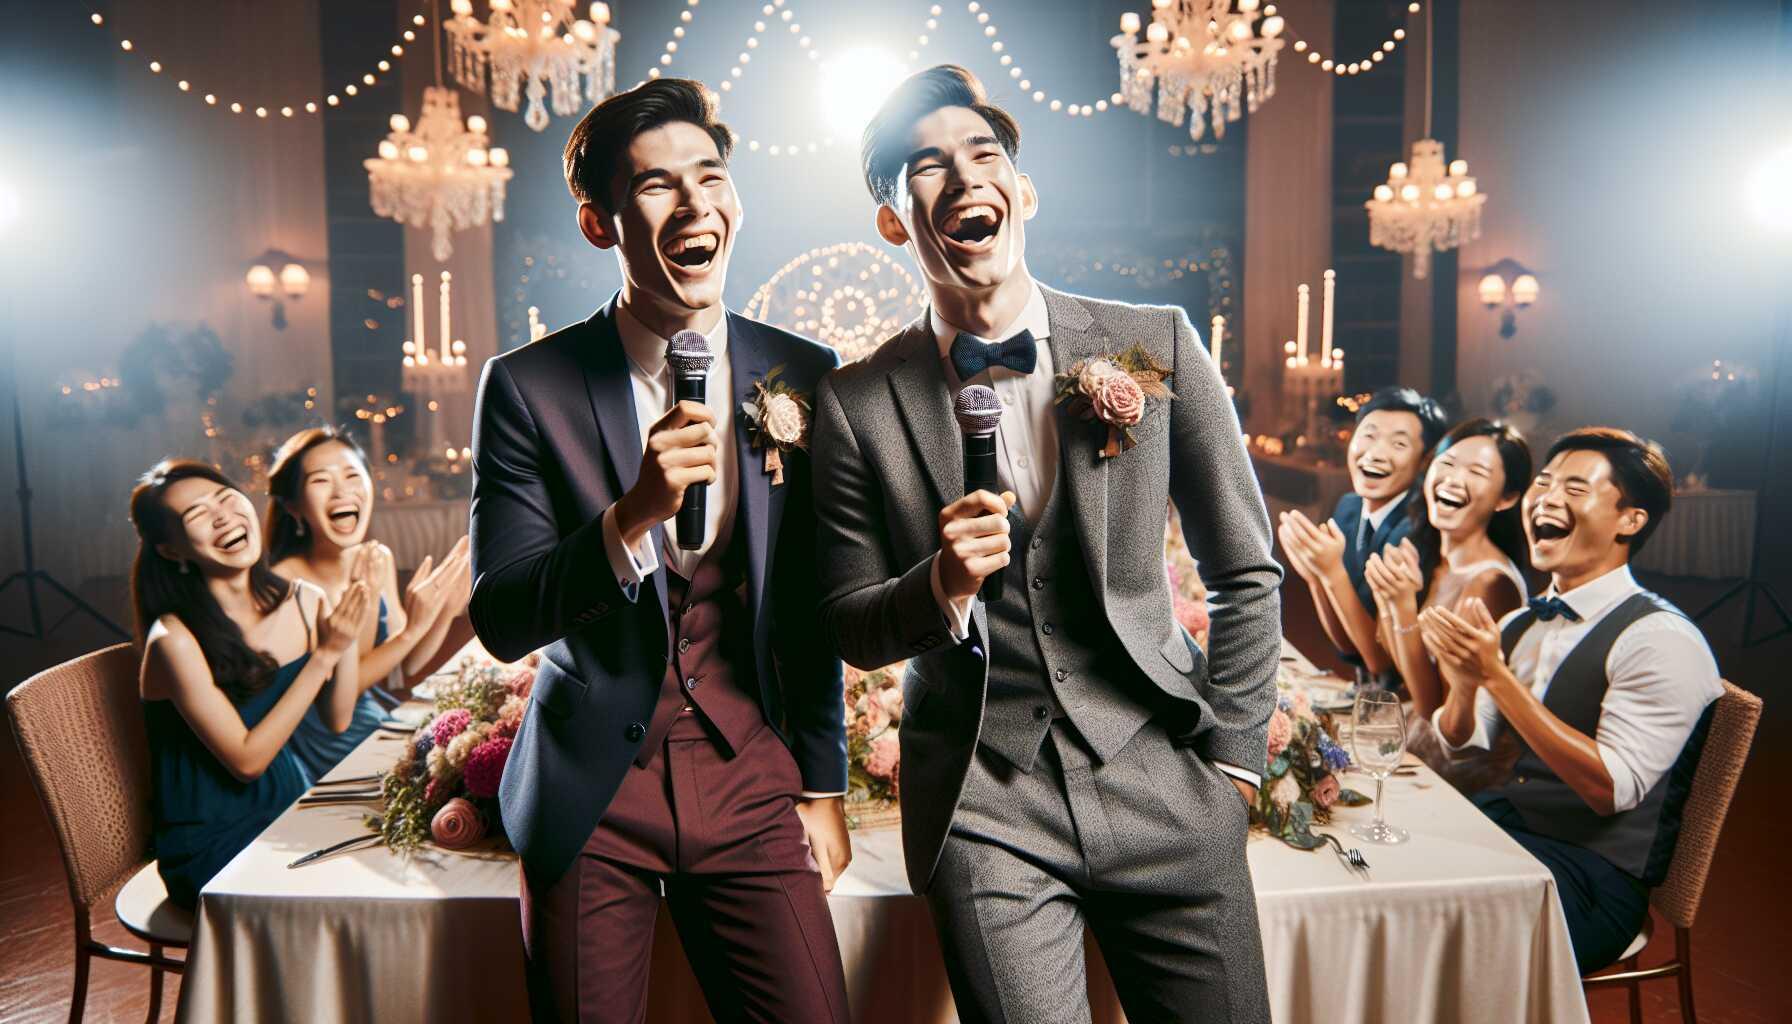 10 Tips for a Hilarious Older and Younger Brother Wedding Speech